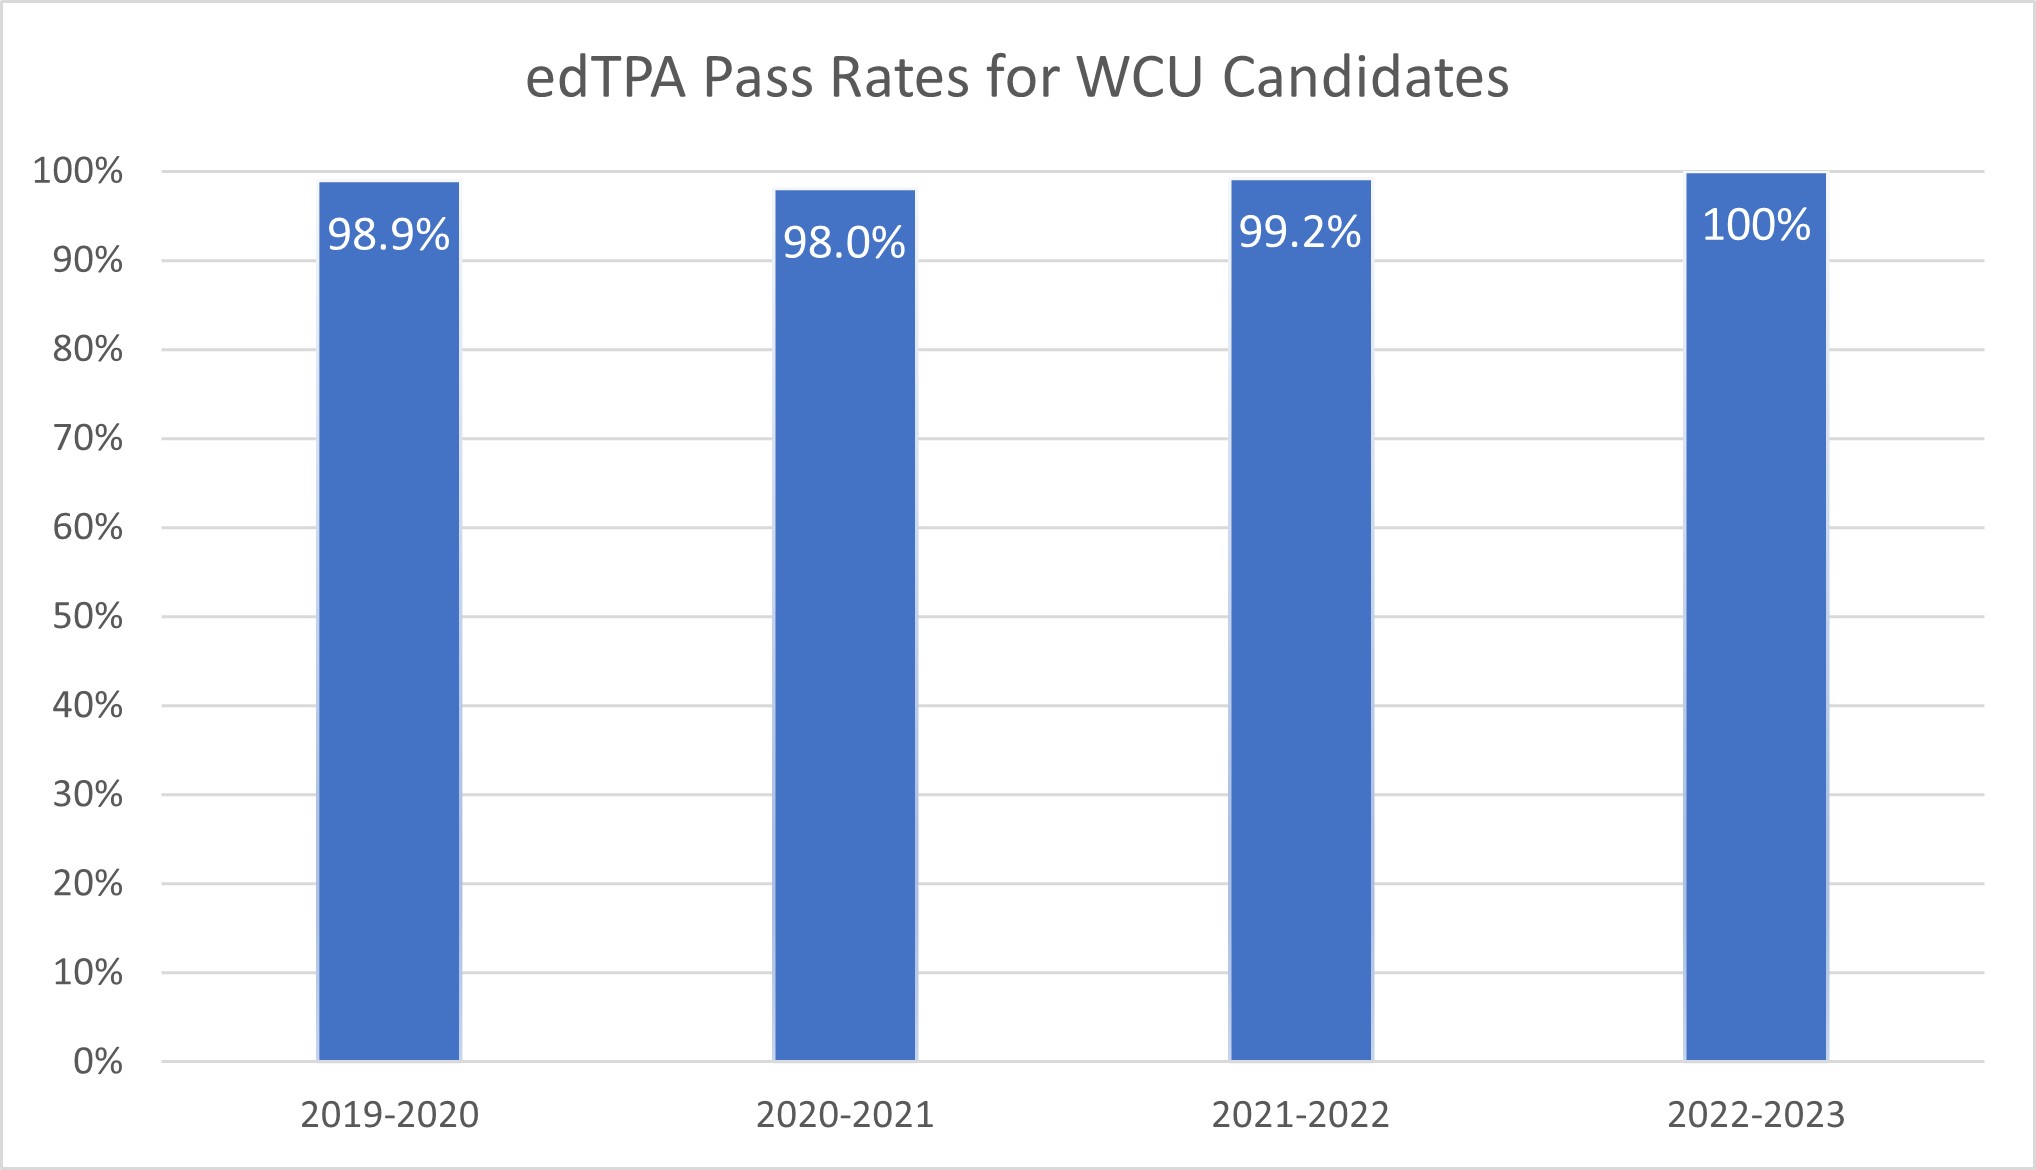 Graph indicating pass rates for edTPA scores that range from 96% to 99% for the past four academic years